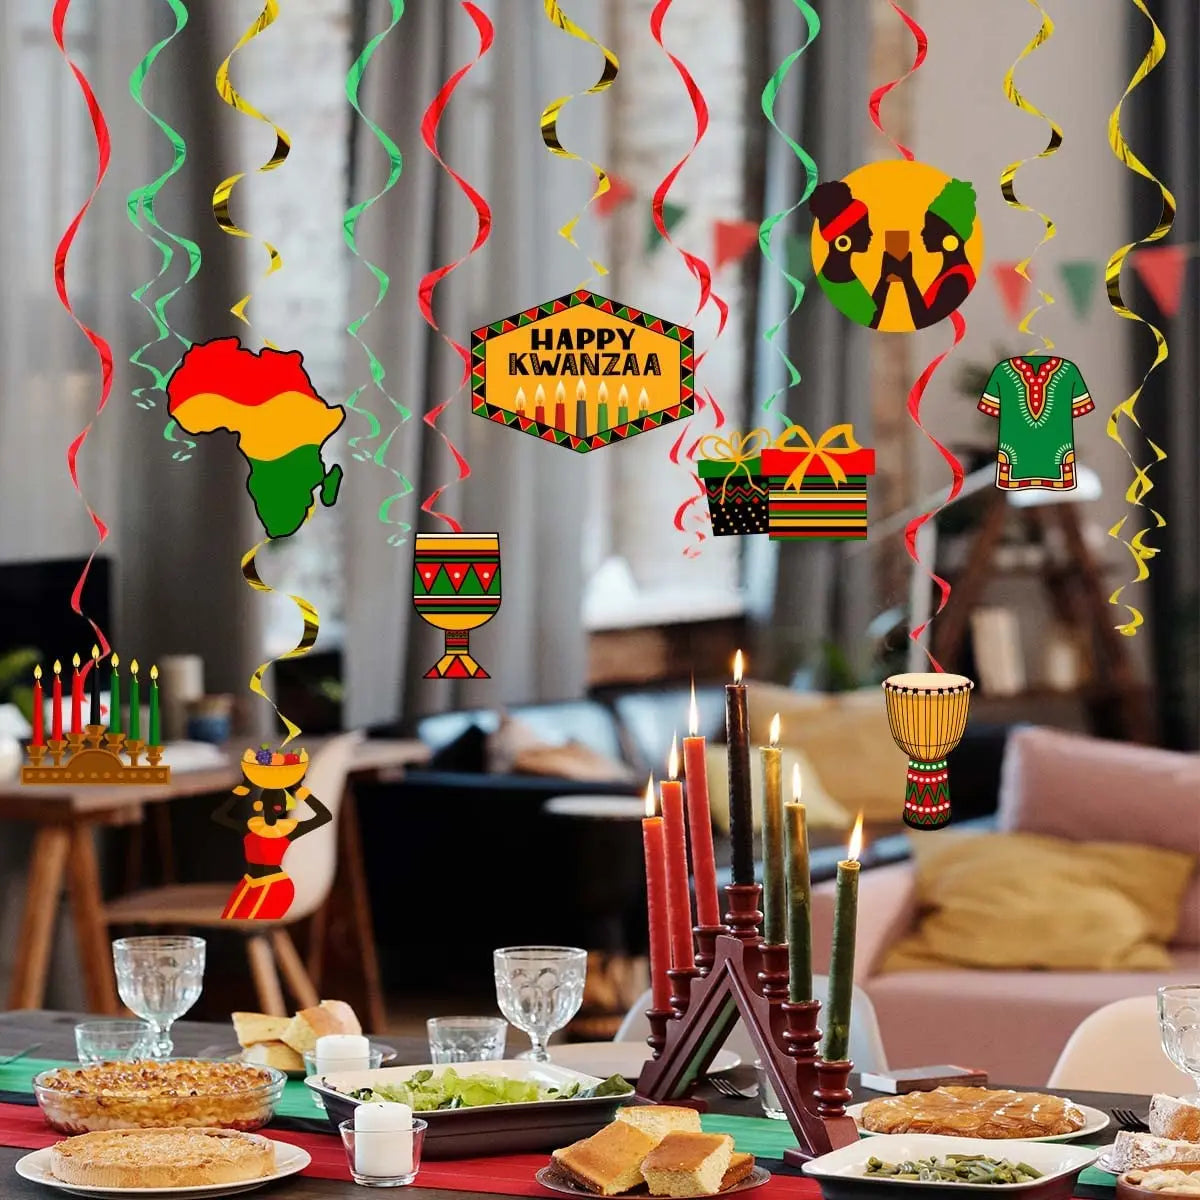 Happy Kwanzaa-African Heritage Holiday Decorations, Party Supplies, Hang Swirls, Celebration for Mantel, Fireplace Decor